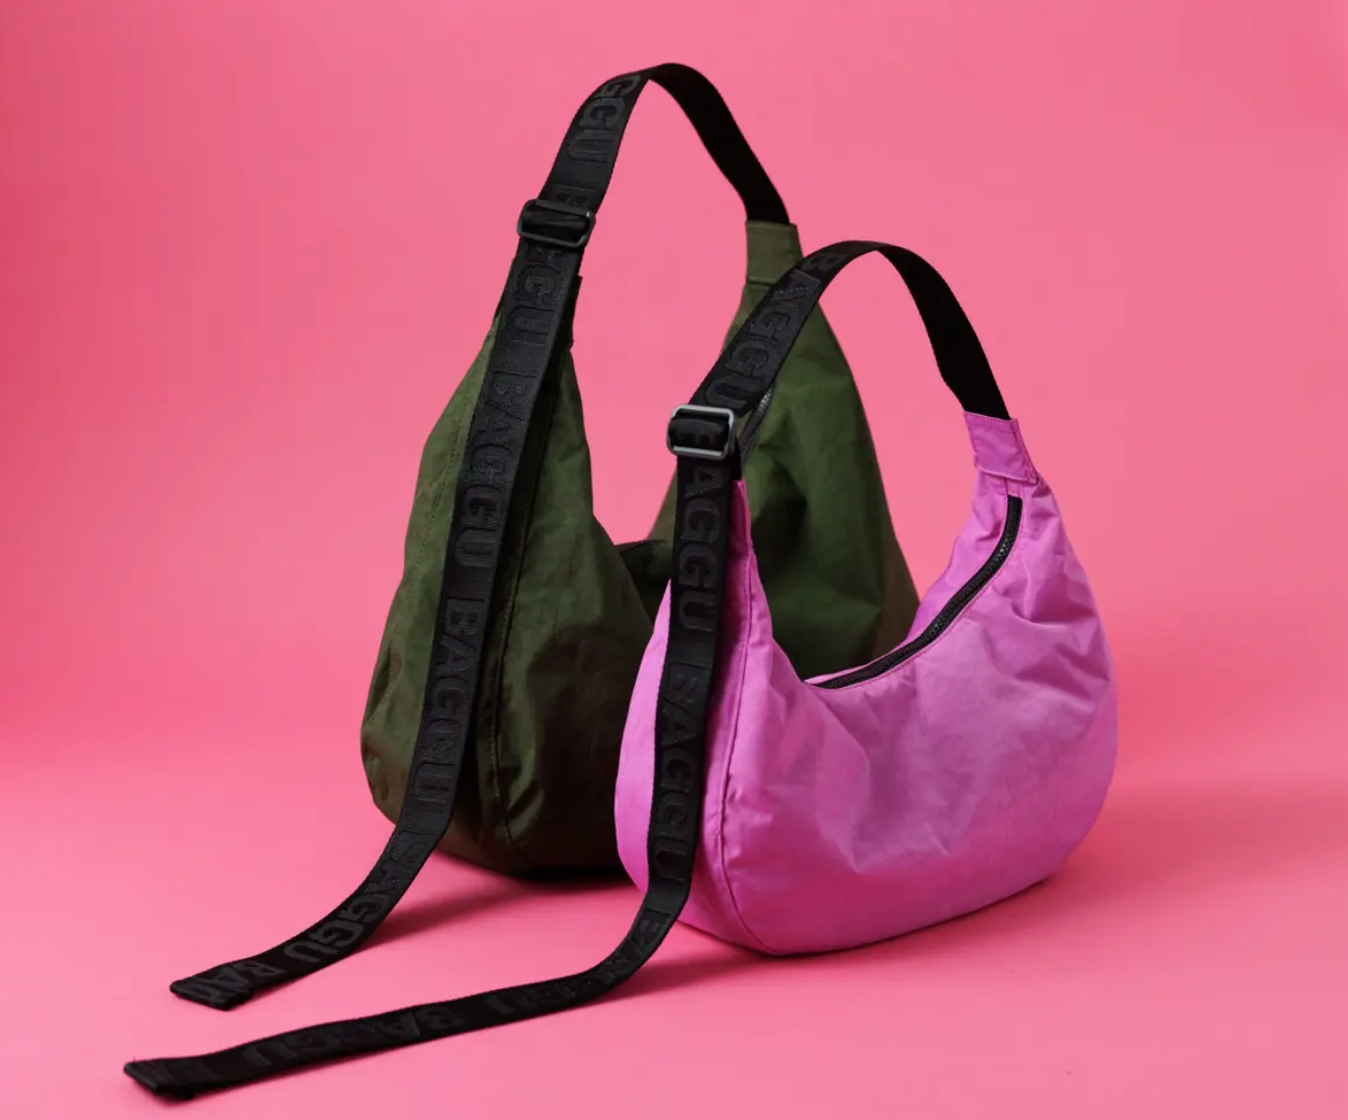 Baggu: Function And Sustainability, The Perfect Recipe For Popular Fashion Accessories